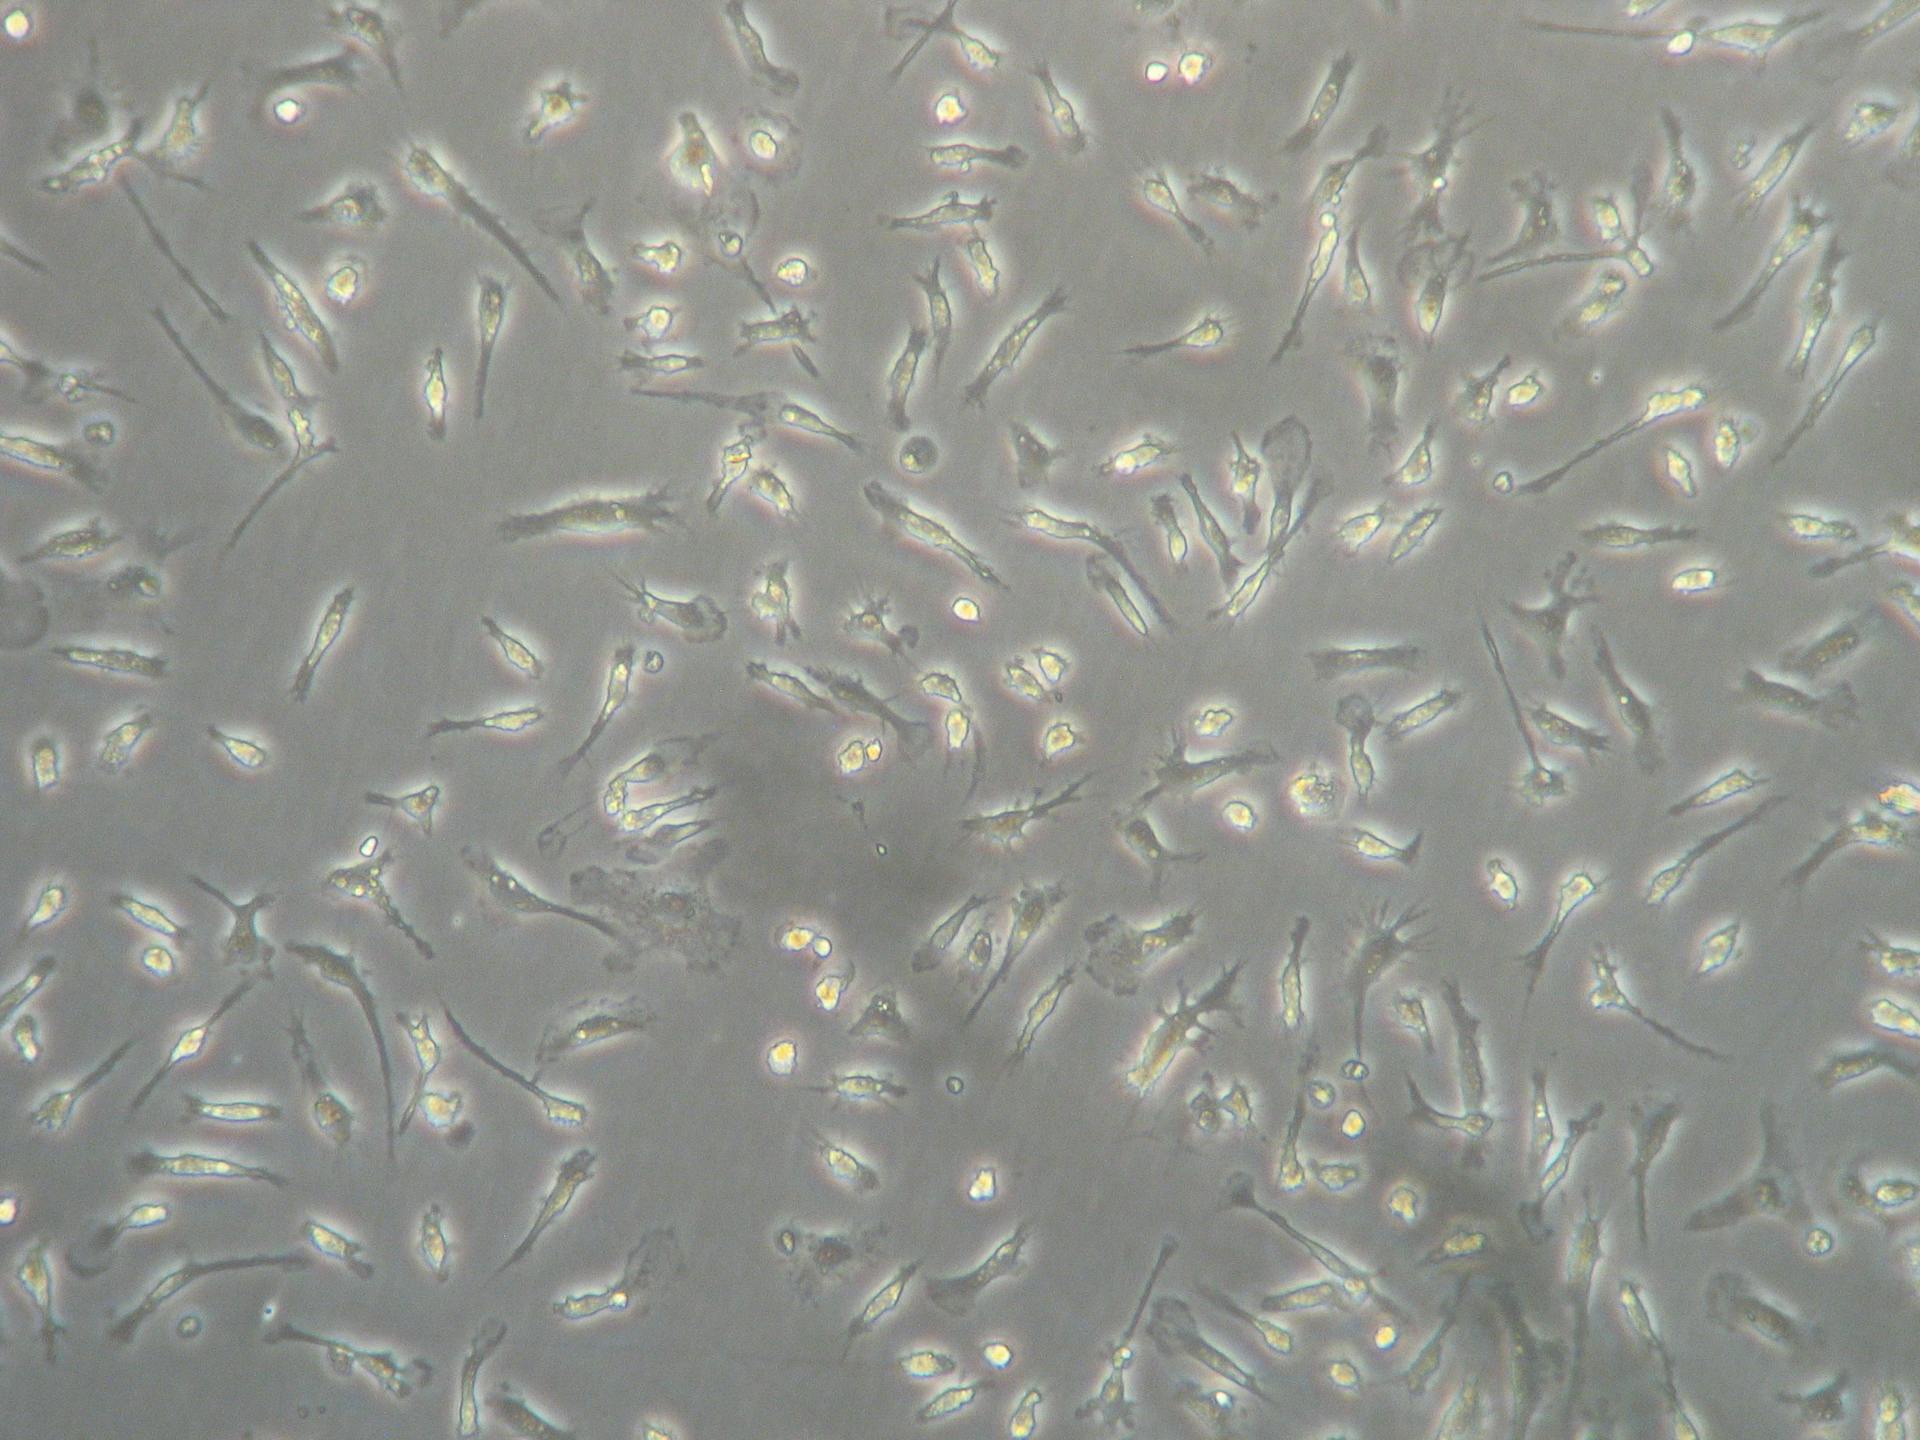 Image from a phase-contrast microscope, capturing microglial cells. As these cells spend more time in culture, they begin to ramify, developing more and more processes.